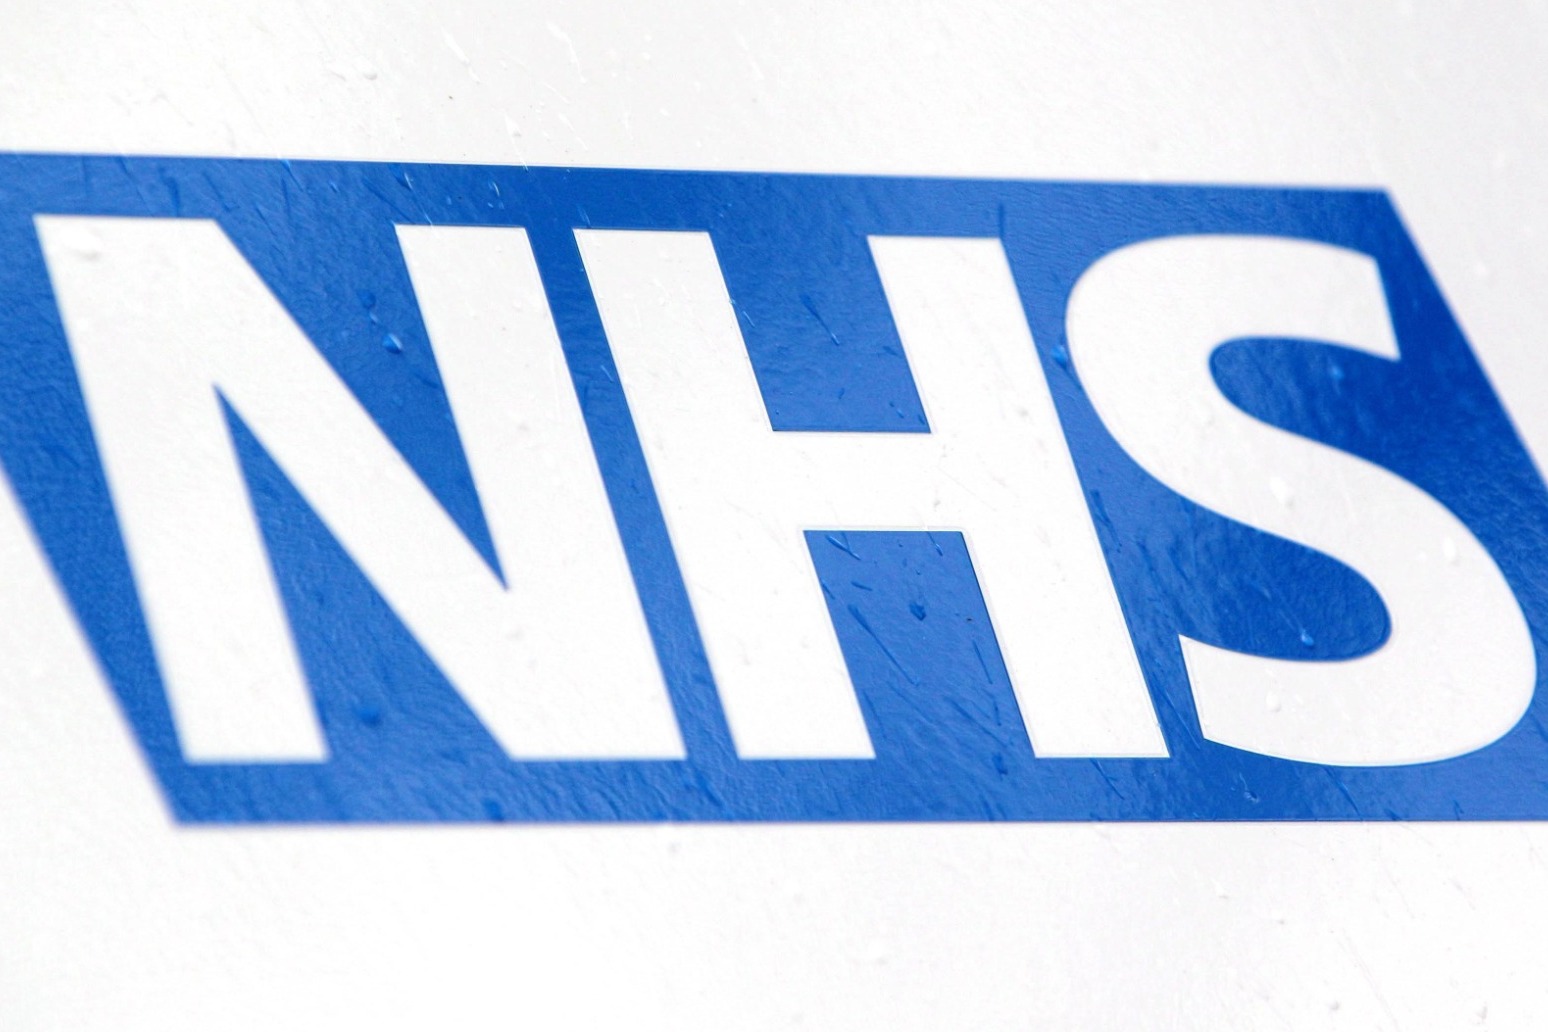 Thousands of NHS physiotherapists go out on strike over pay 